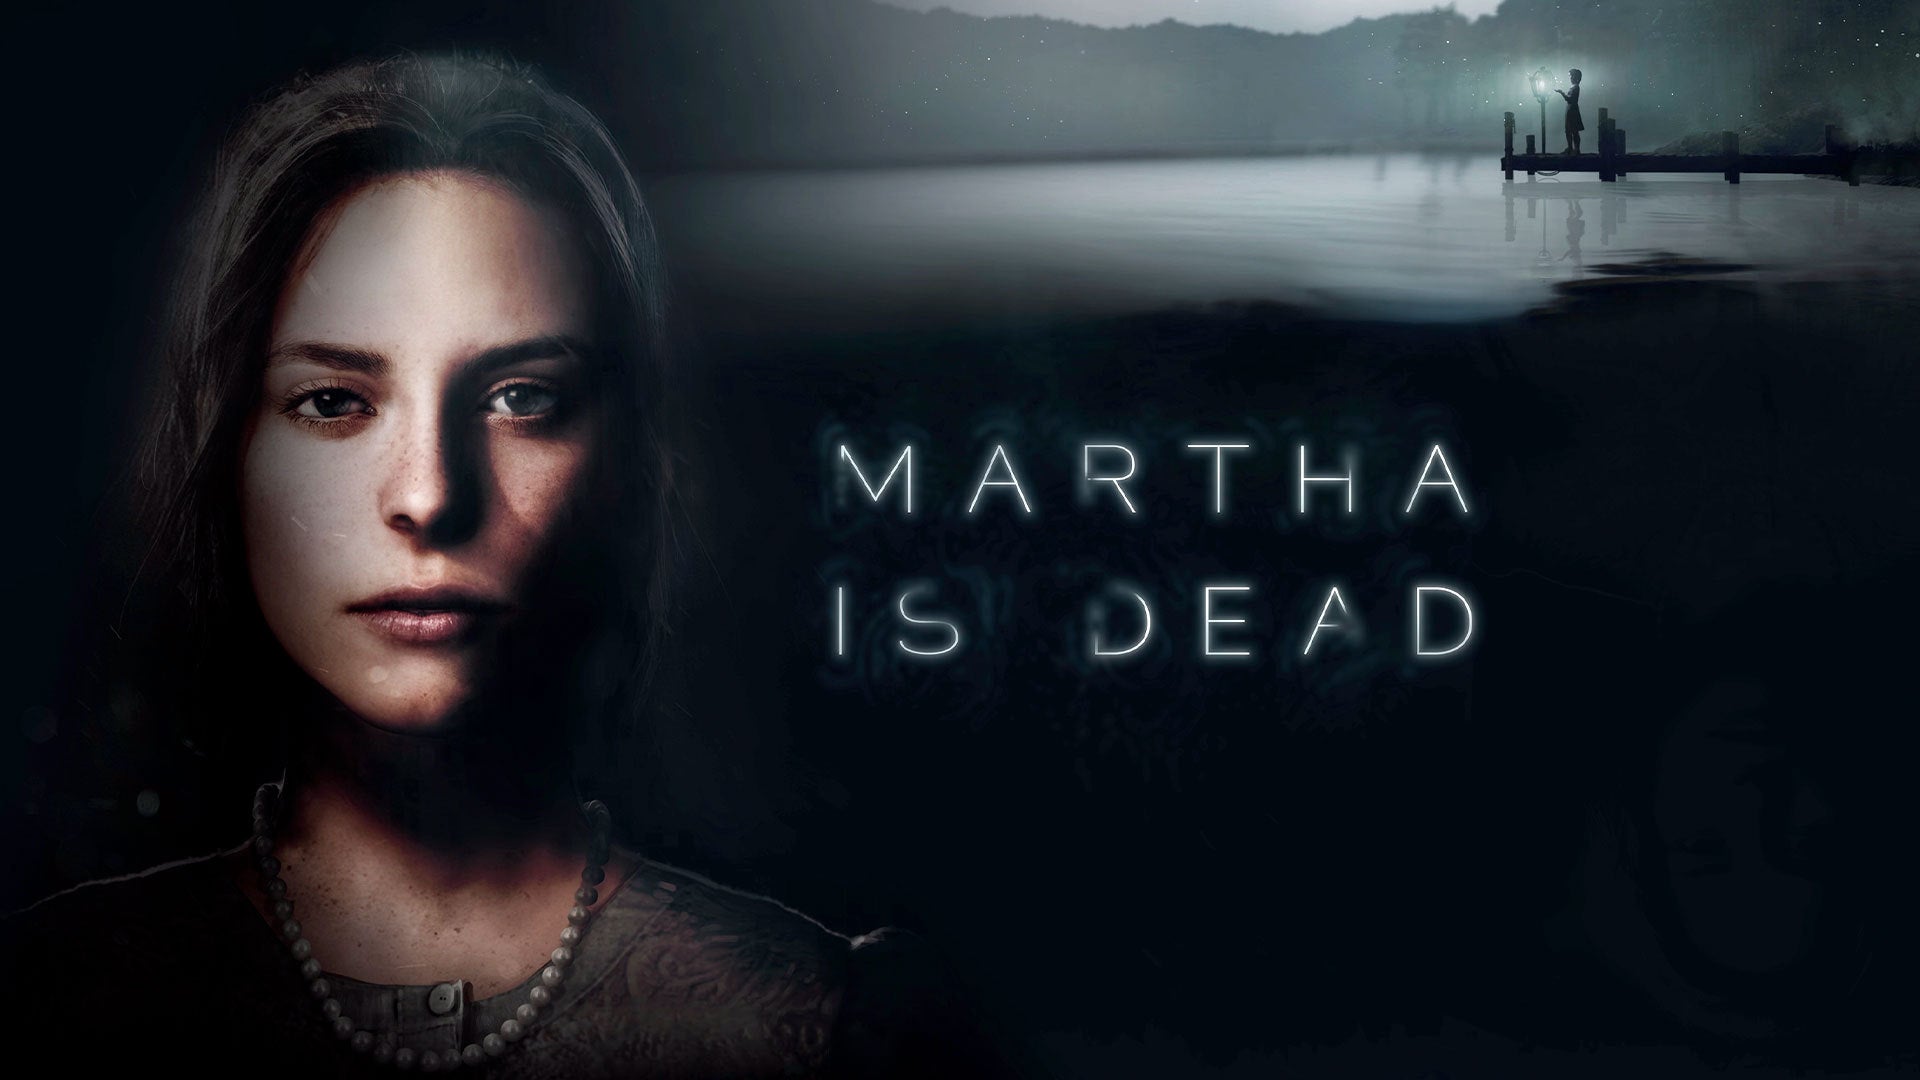 First Person Psychological Horror, Martha Is Dead, Comes To PlayStation, Xbox, & PC On Feb. 24